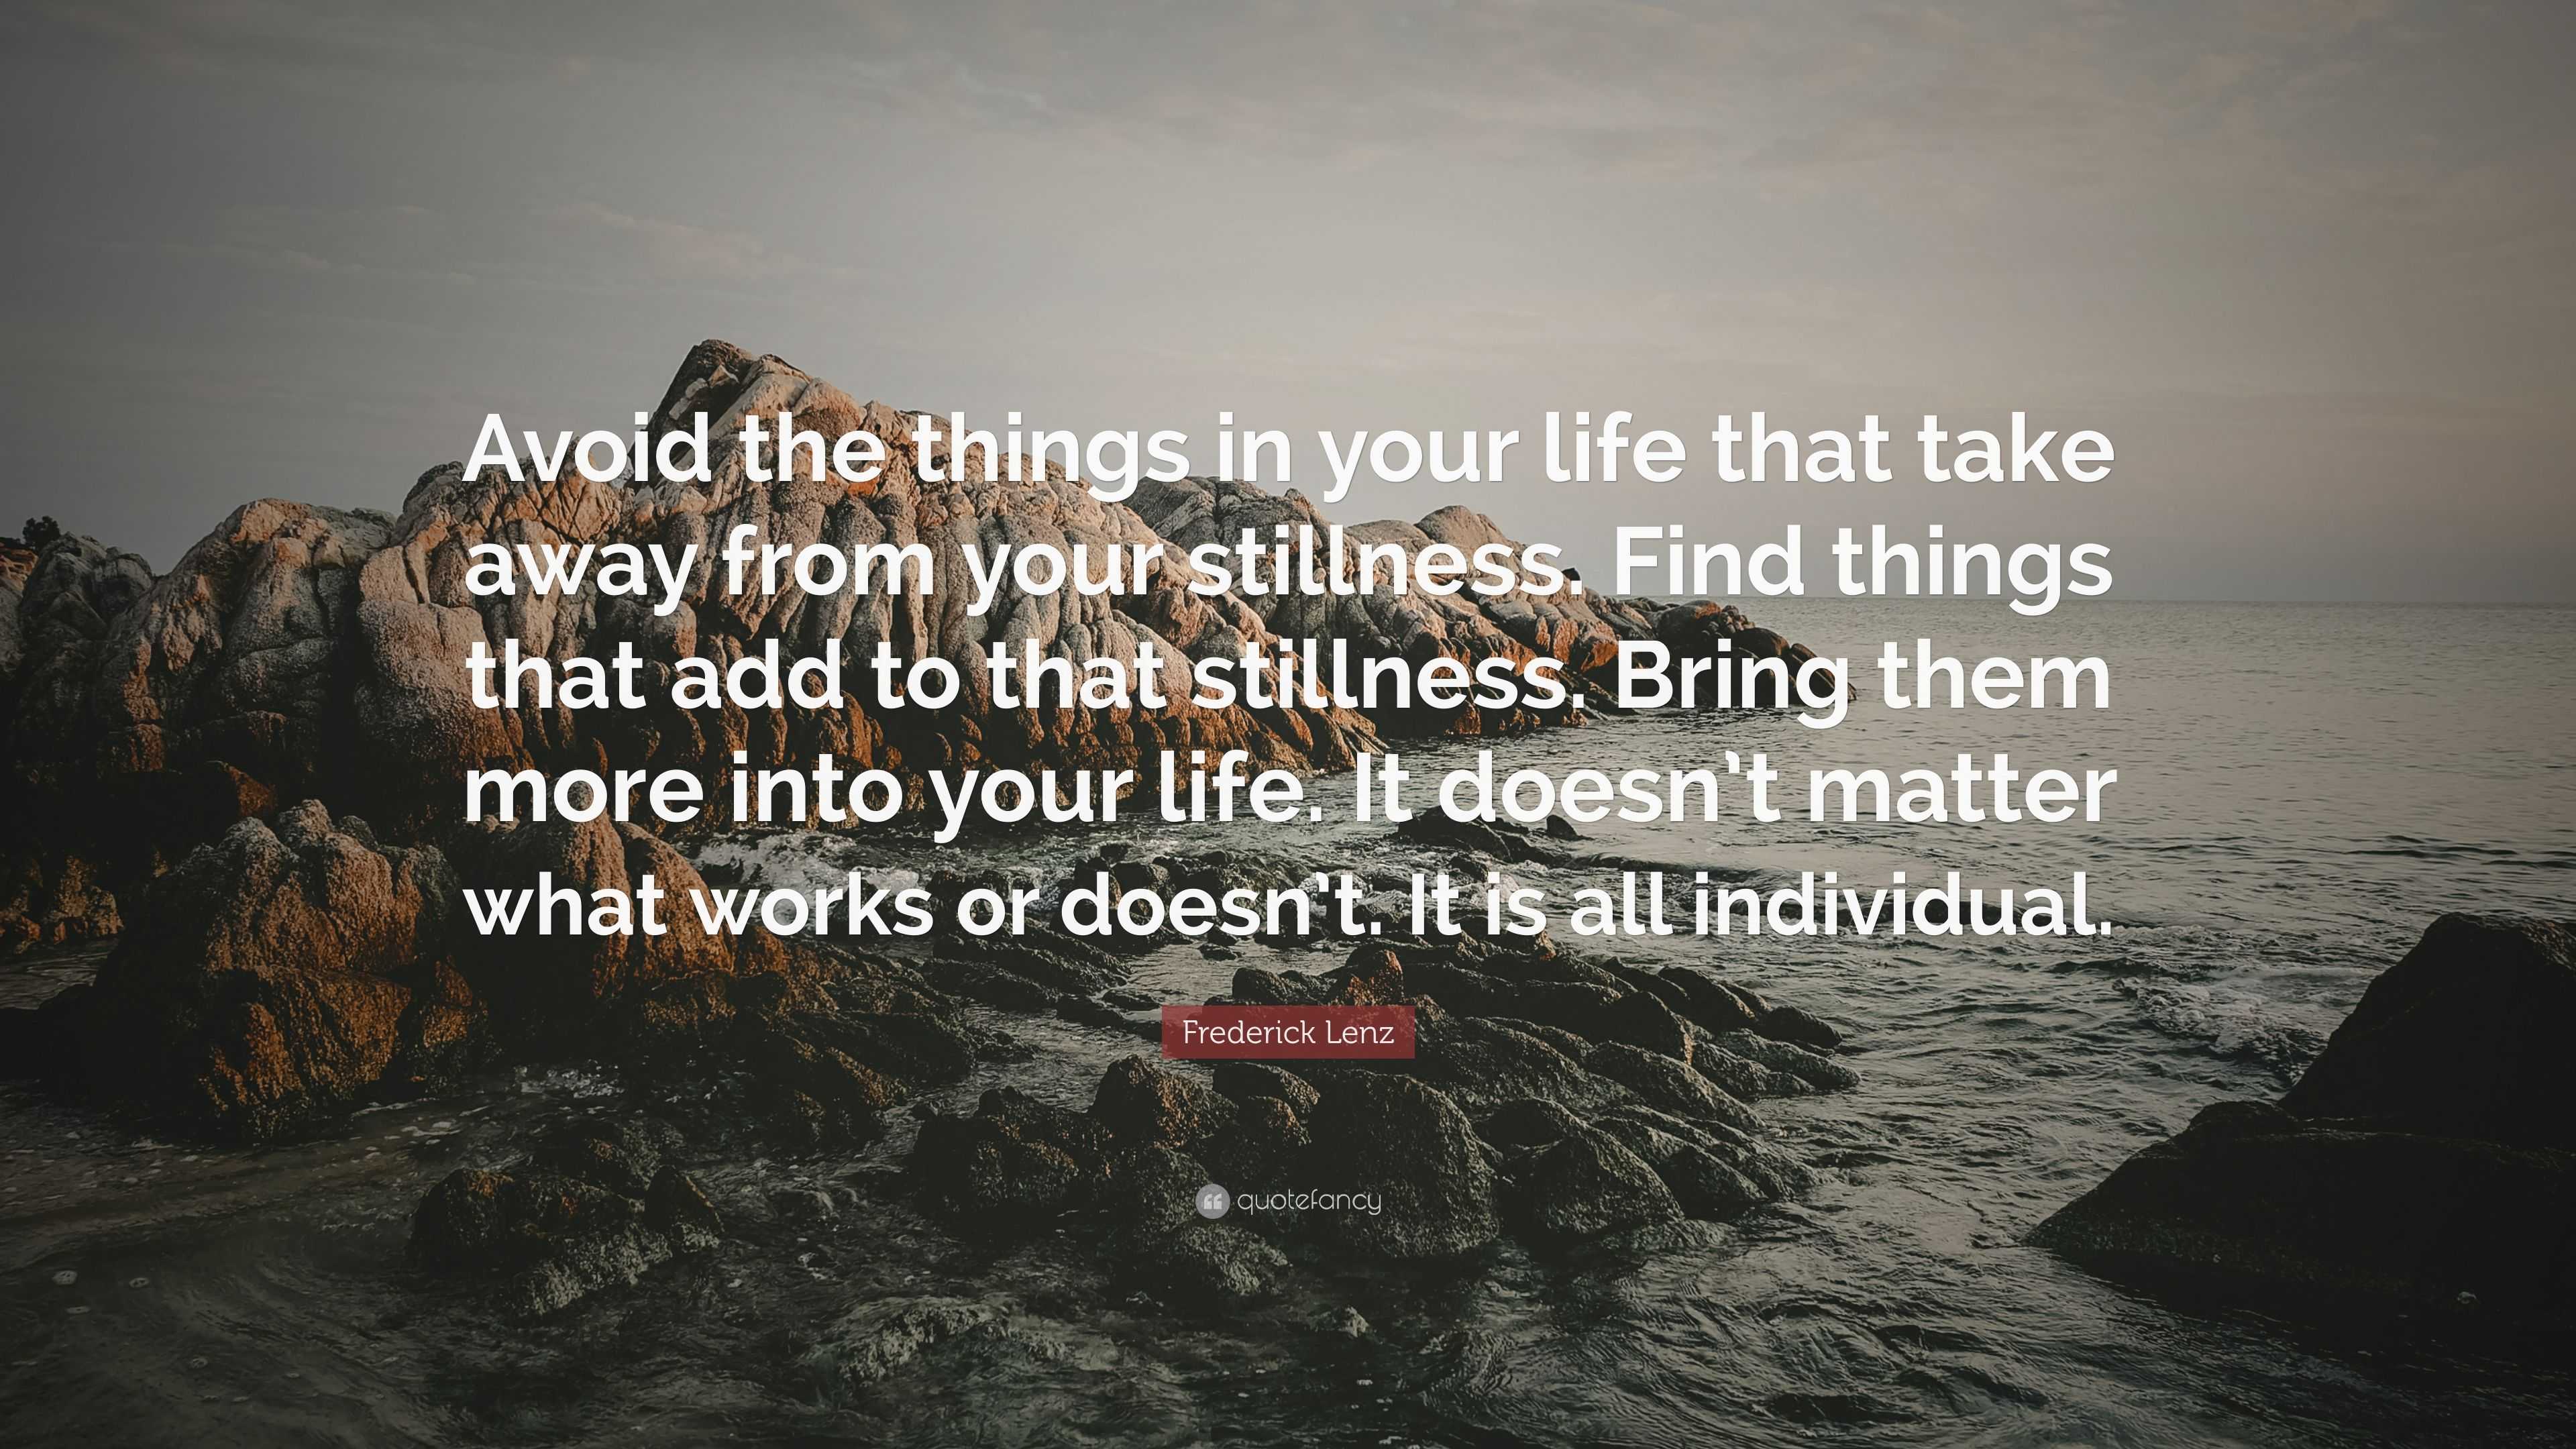 Frederick Lenz Quote: “Avoid the things in your life that take away ...